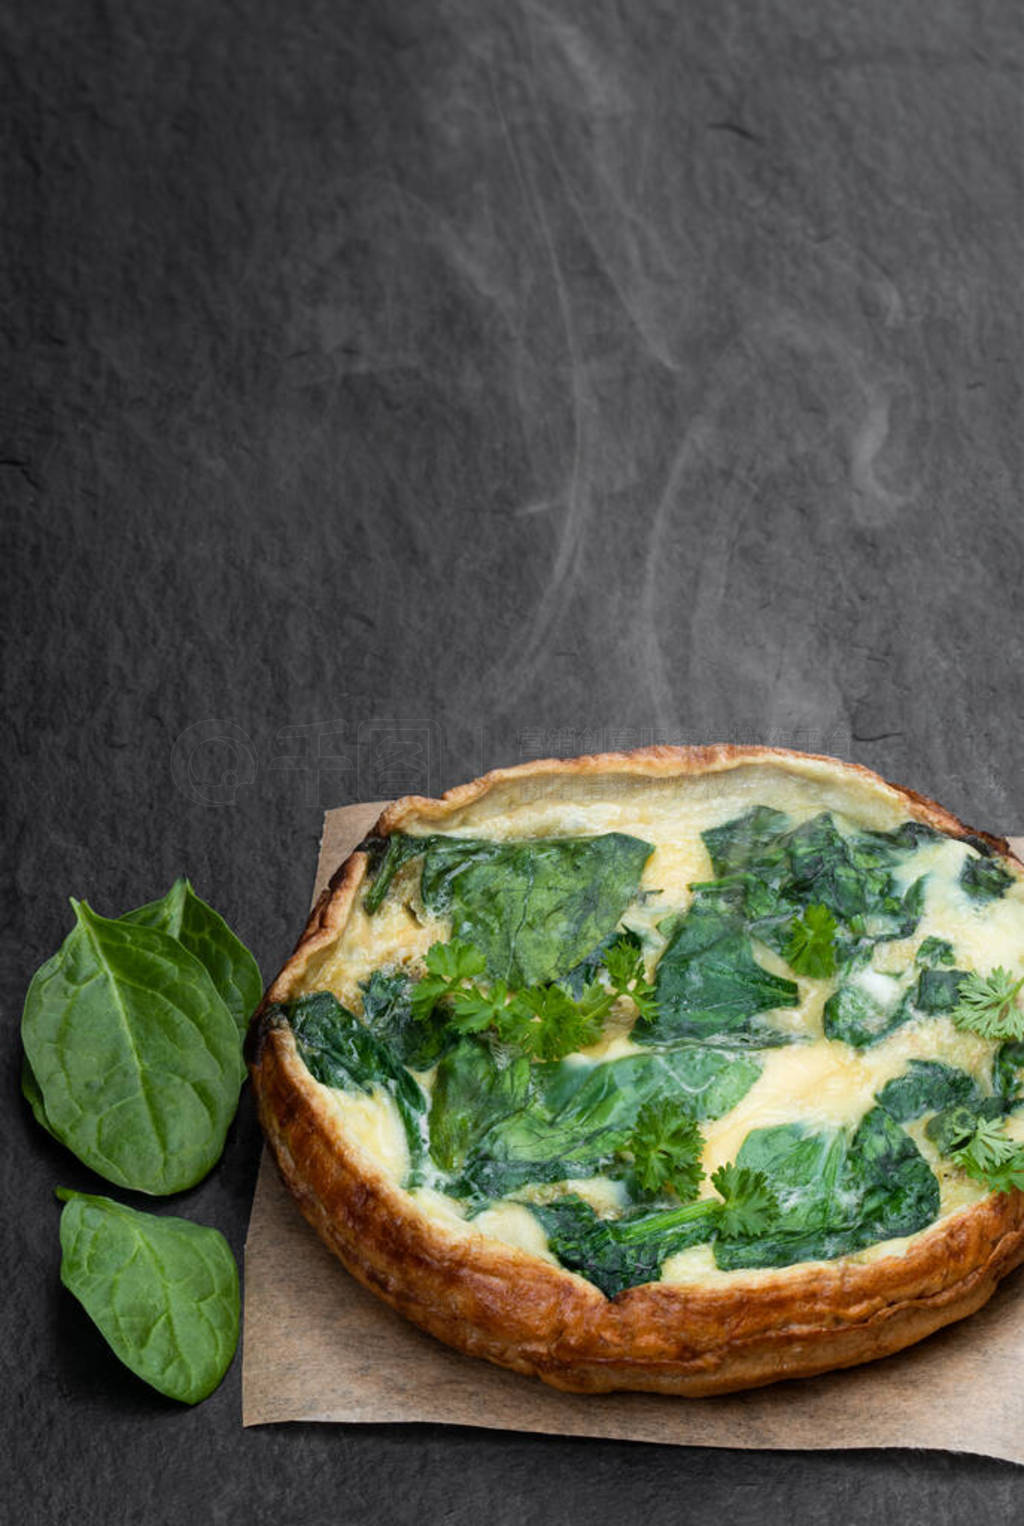 Omelette with spinach on black stone background